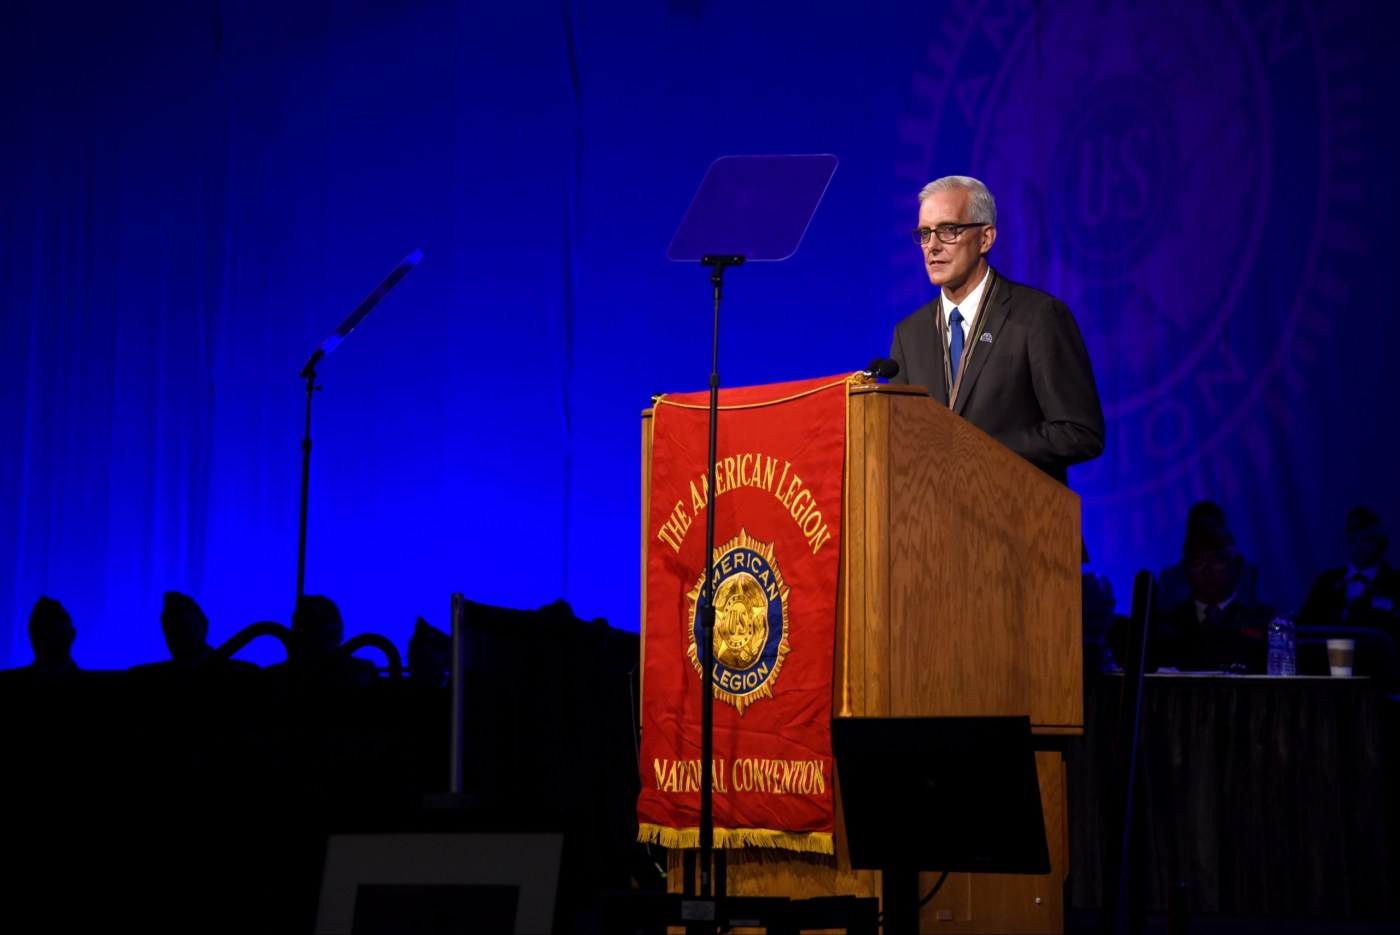 VA Secretary Denis McDonough speaks at the American Legion National Convention Aug. 31 in Phoenix, Arizona. As the nation watches the military mission end in Afghanistan, McDonough said VA is here for all Veterans who need help.